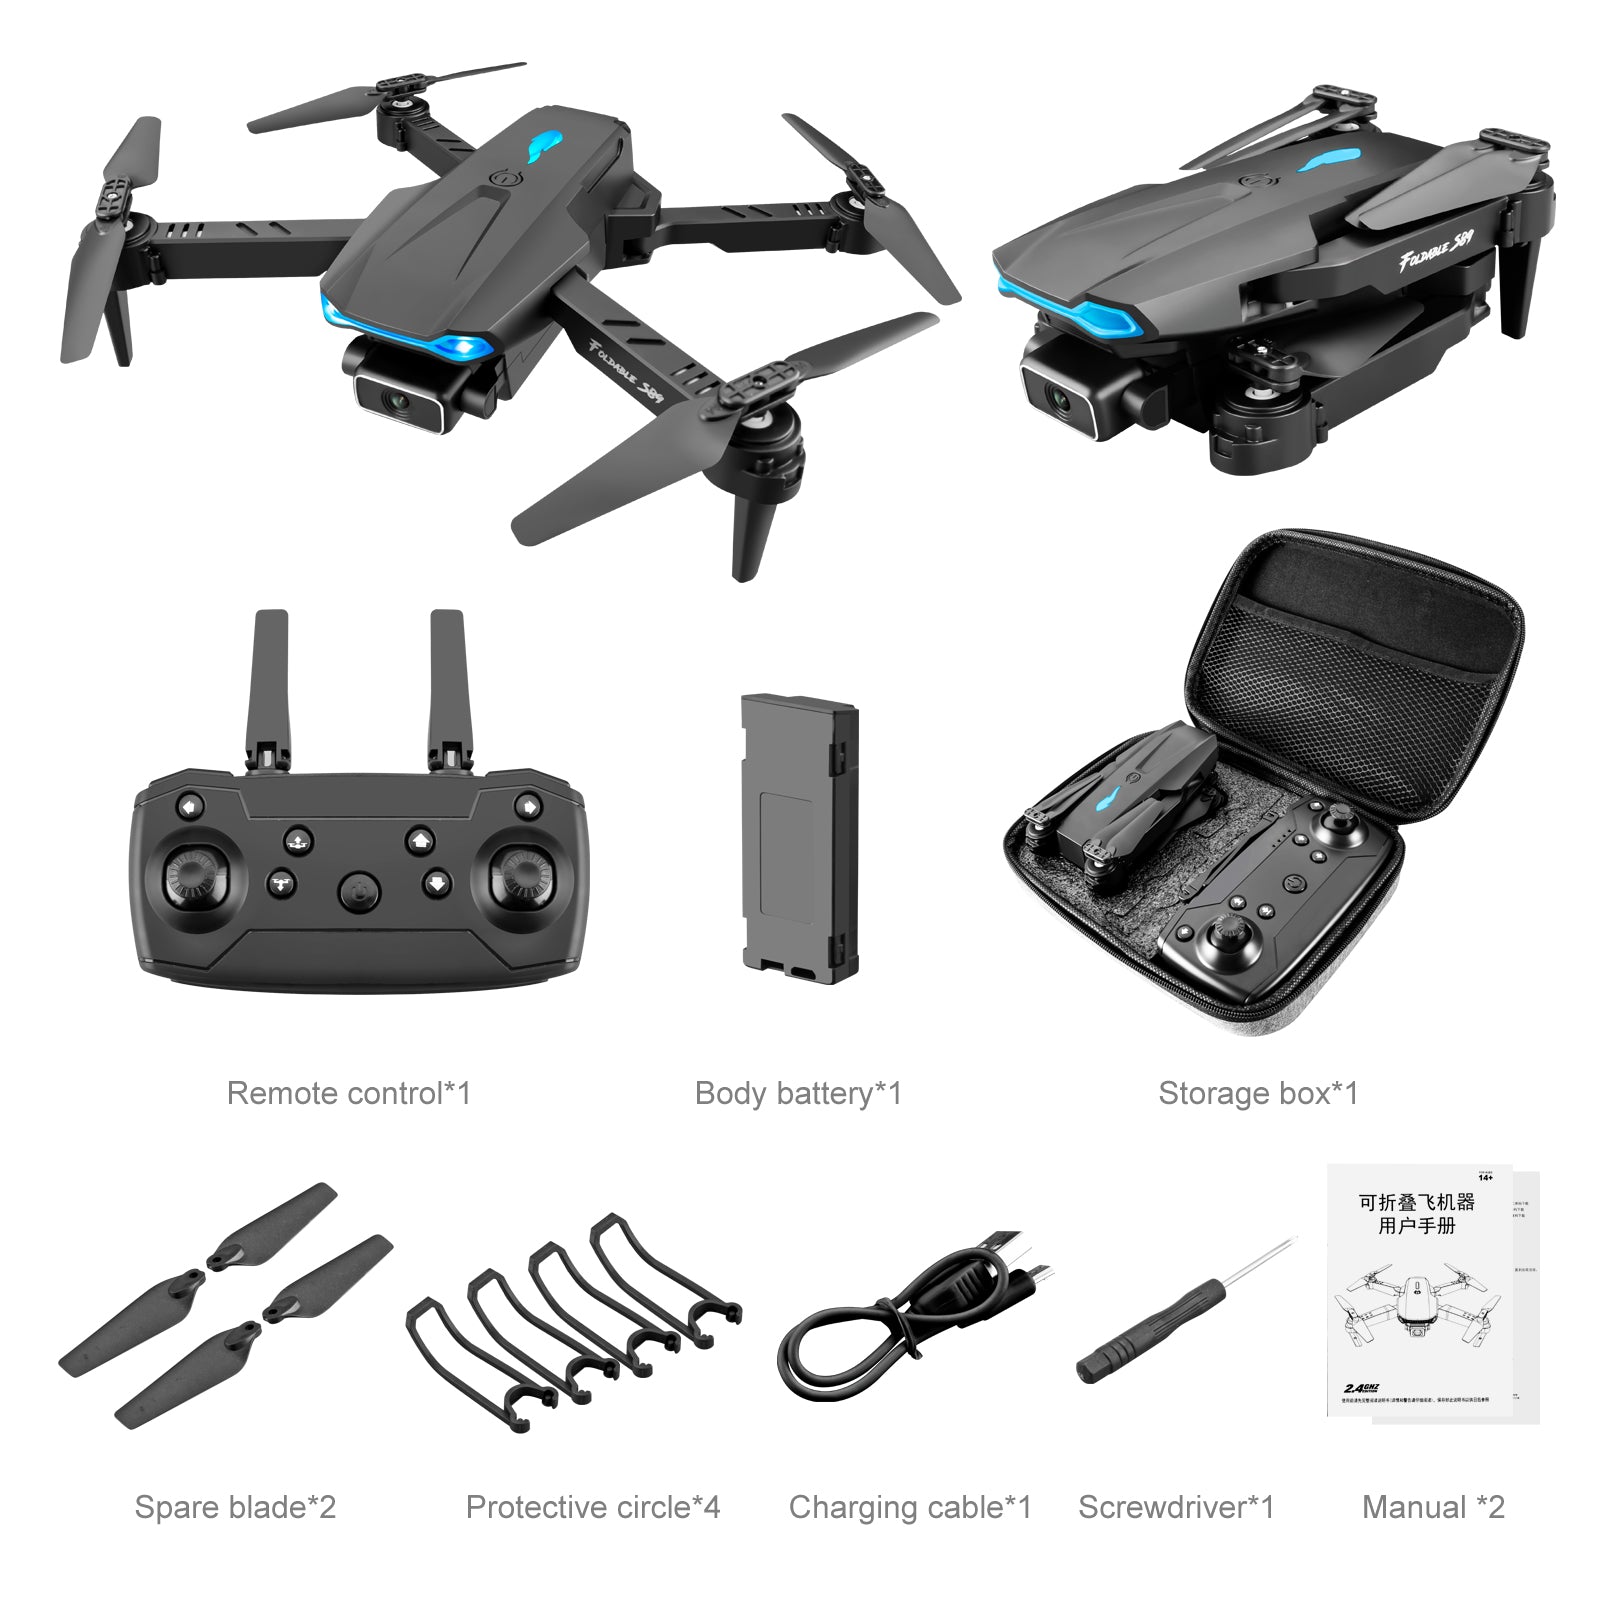 OEM S89 Drone With 4K HD Dual Camera Wifi FPV Dron Pro Mini Professional Foldable RC Droness Quadcopter Cameras Dronne Drones | Electrr Inc